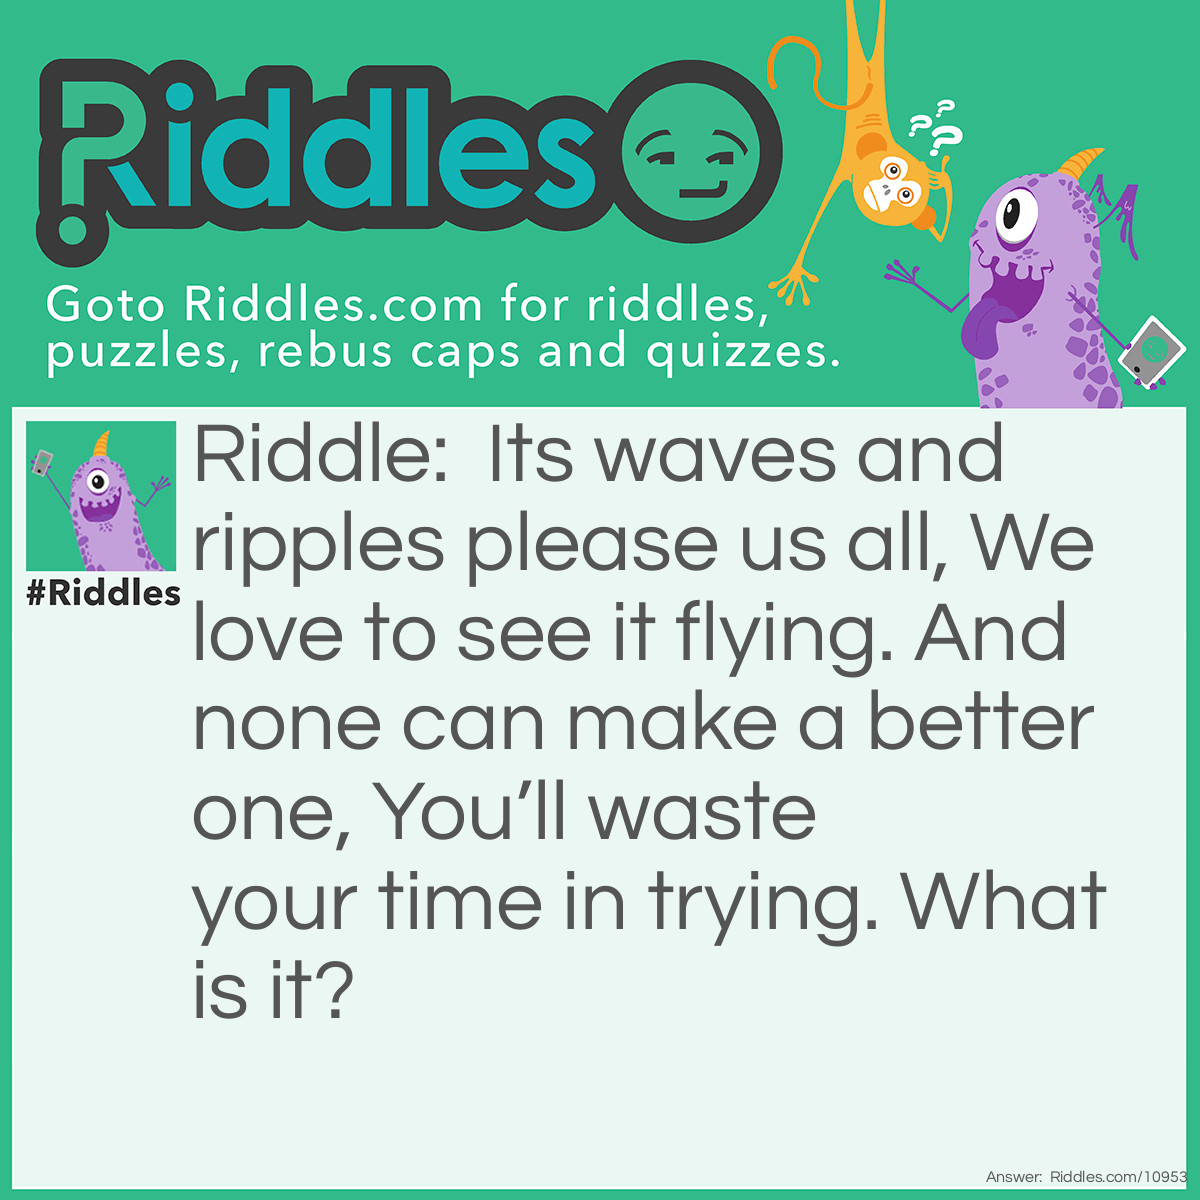 Riddle: Its waves and ripples please us all, We love to see it flying. And none can make a better one, You’ll waste your time in trying. What is it? Answer: Our flag.